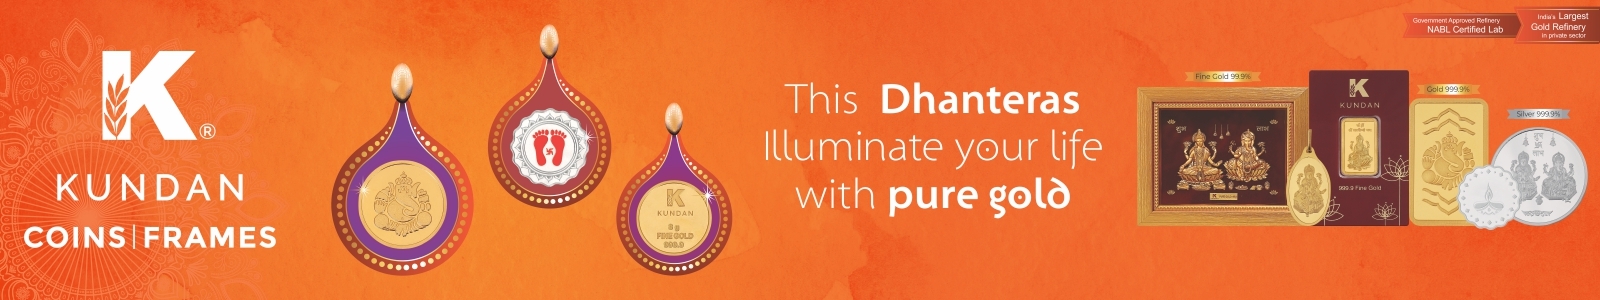 Make this festivity grandeur by gifting Gold or Silver Coins this Dhanteras